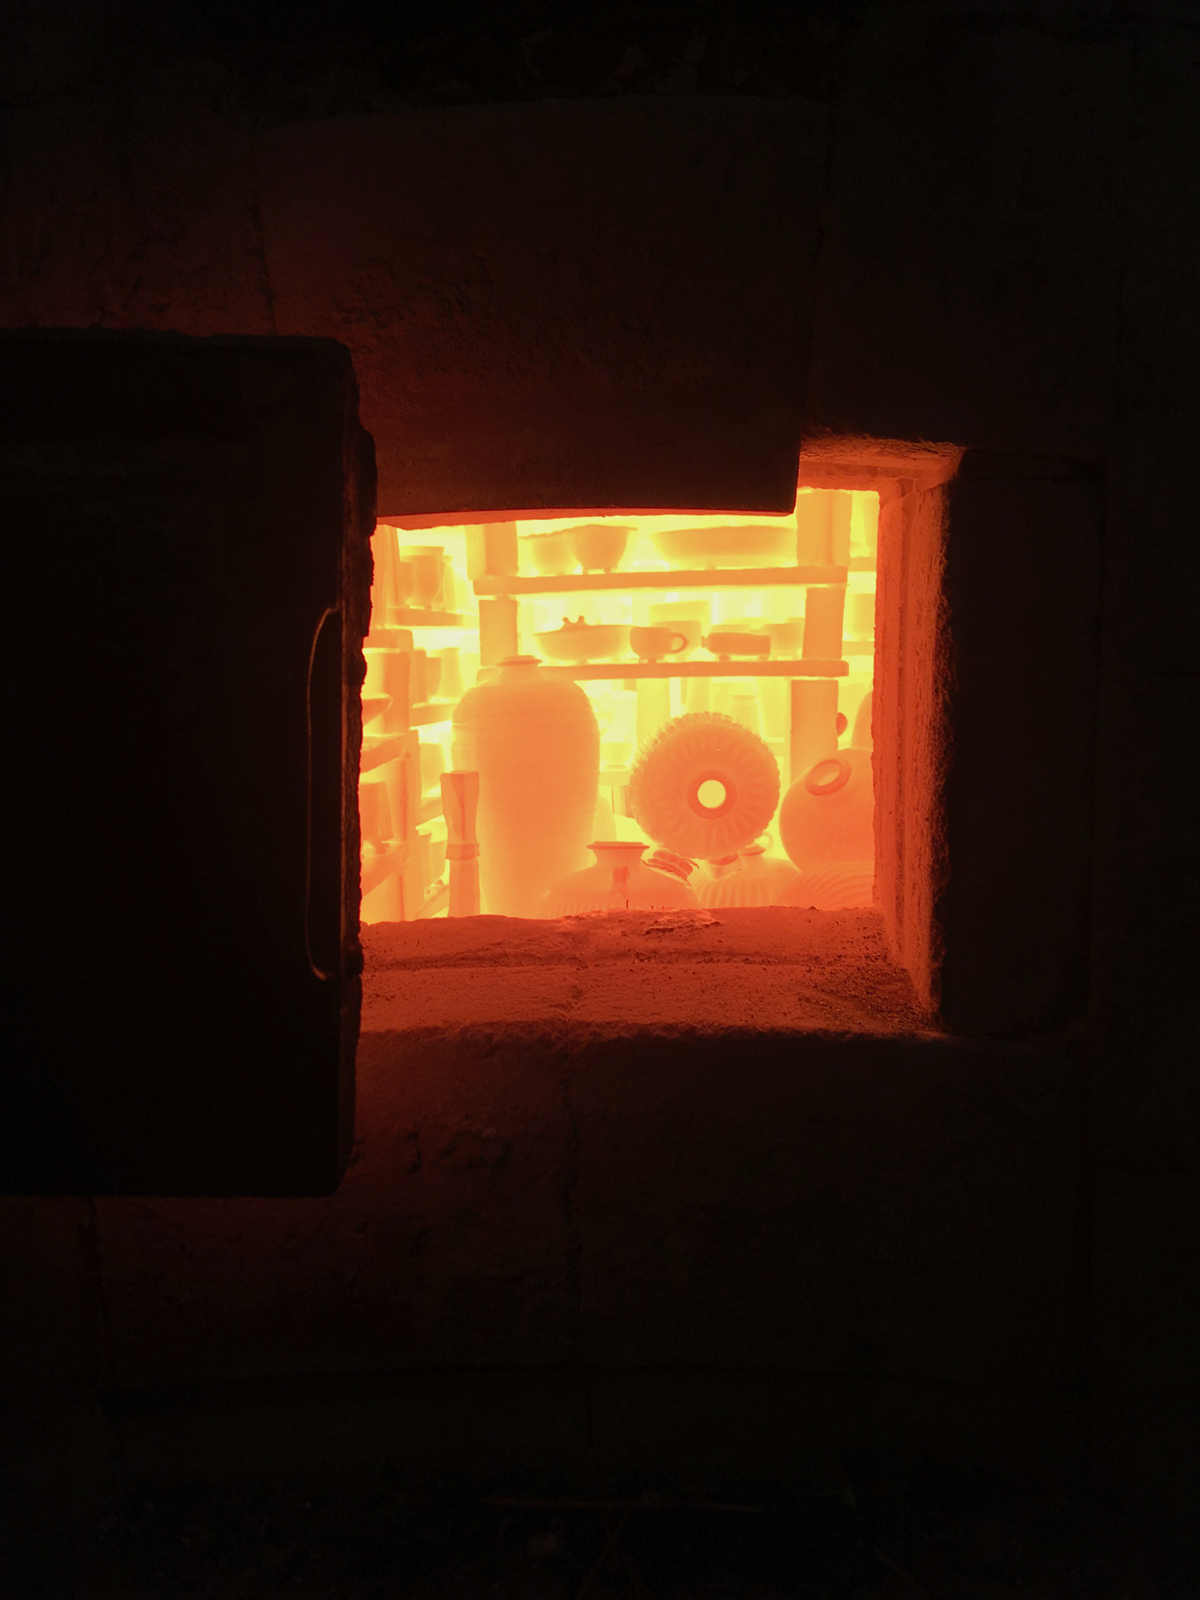 window providing view into a kiln with glowing red ceramics being fired